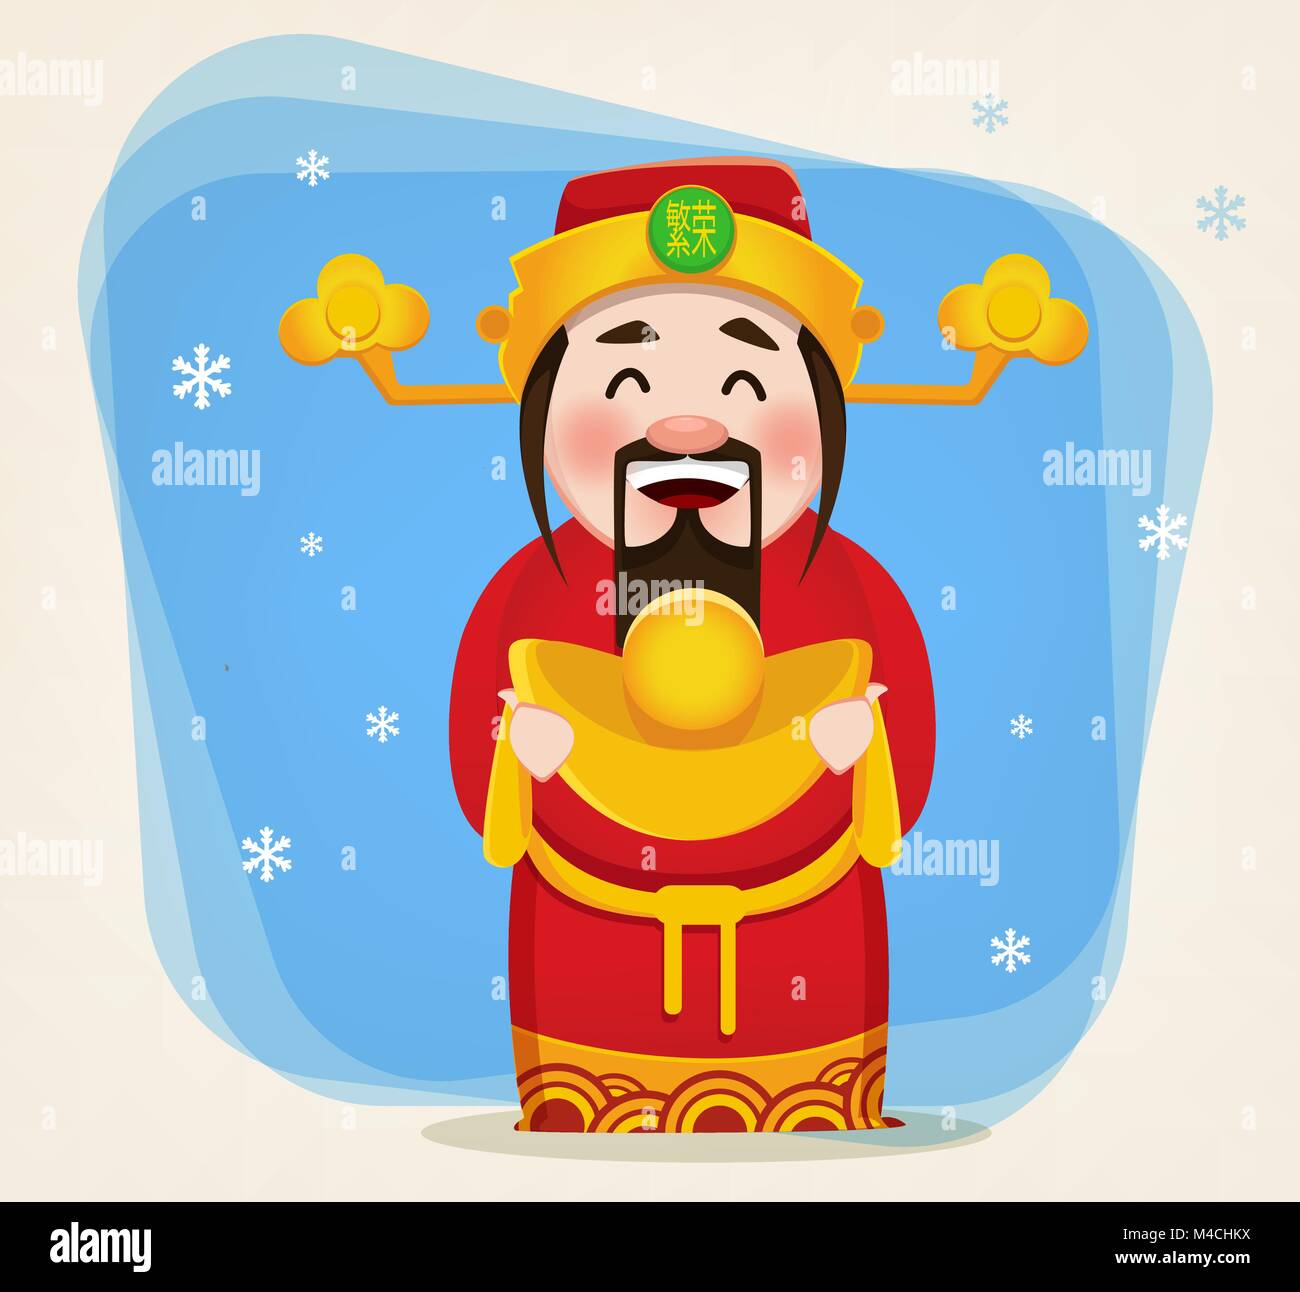 Chinese God of Wealth. Chinese New Year 2018 greeting card. Vector illustration. Hieroglyph on hat means prosperity. Stock Vector